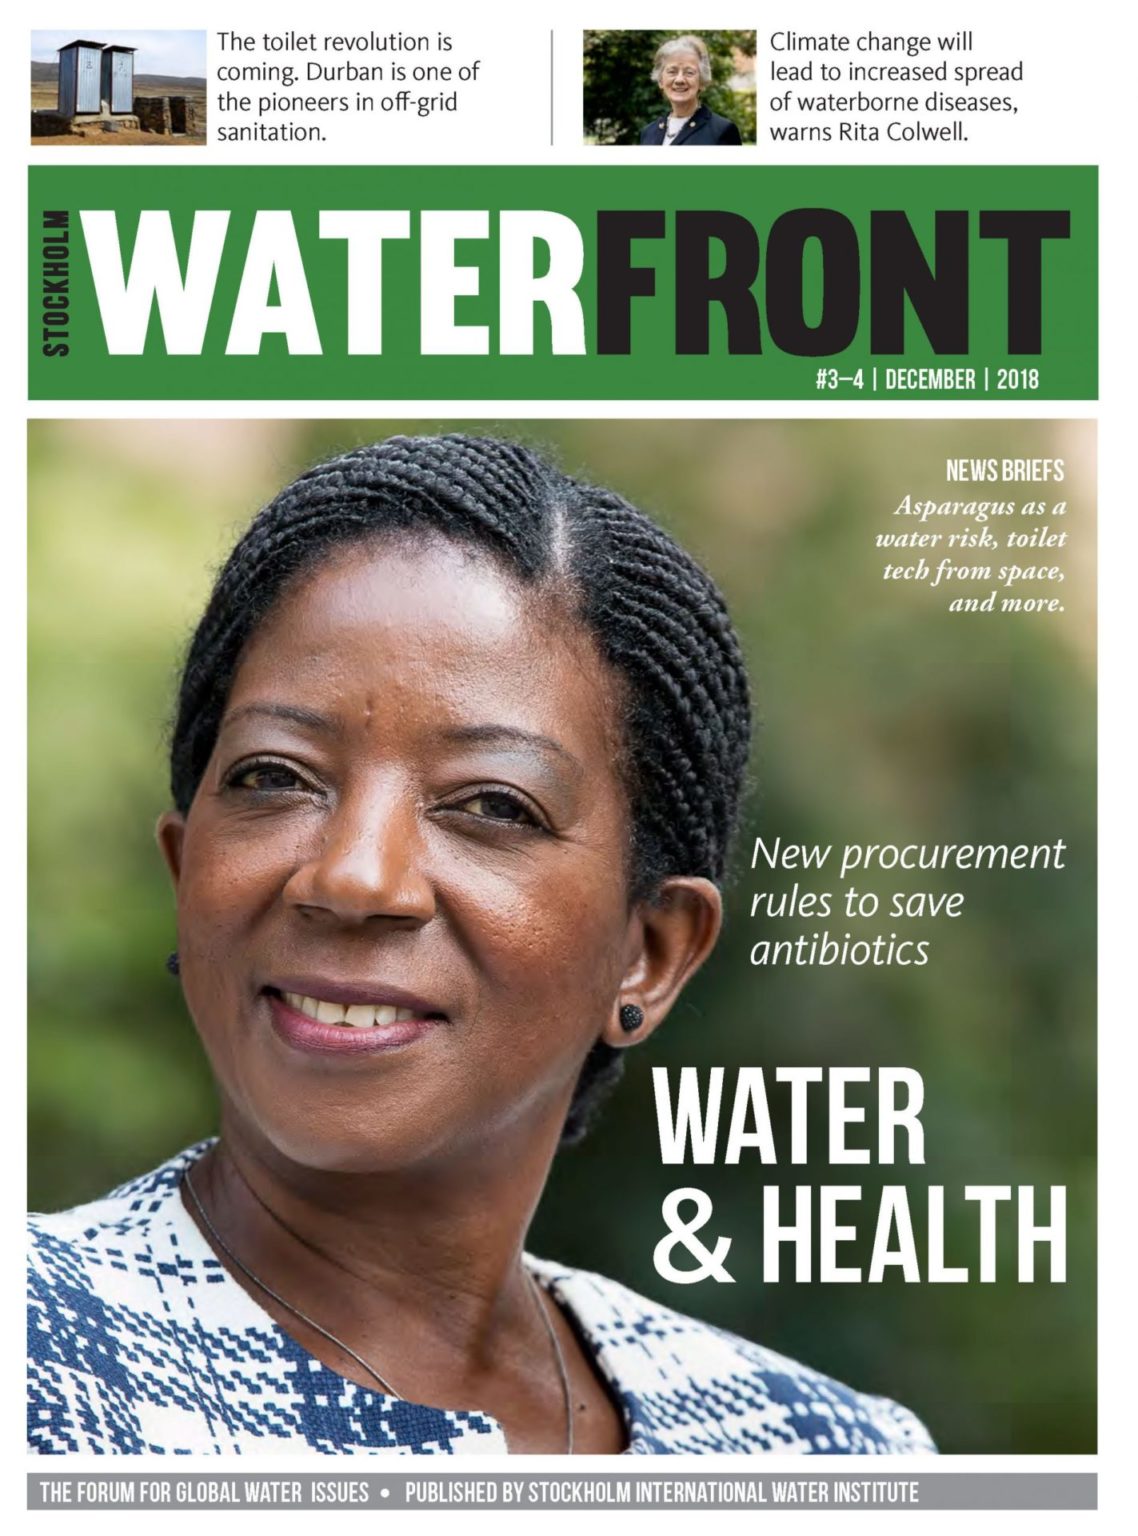 Cover of WaterFront Magzine 2018 showing a photo of Dr. Rosemary Kumwenda, SPHS Coordinator and UNDP Regional Team Leader HIV/ Health and Development, Eastern Europe and Central Asia